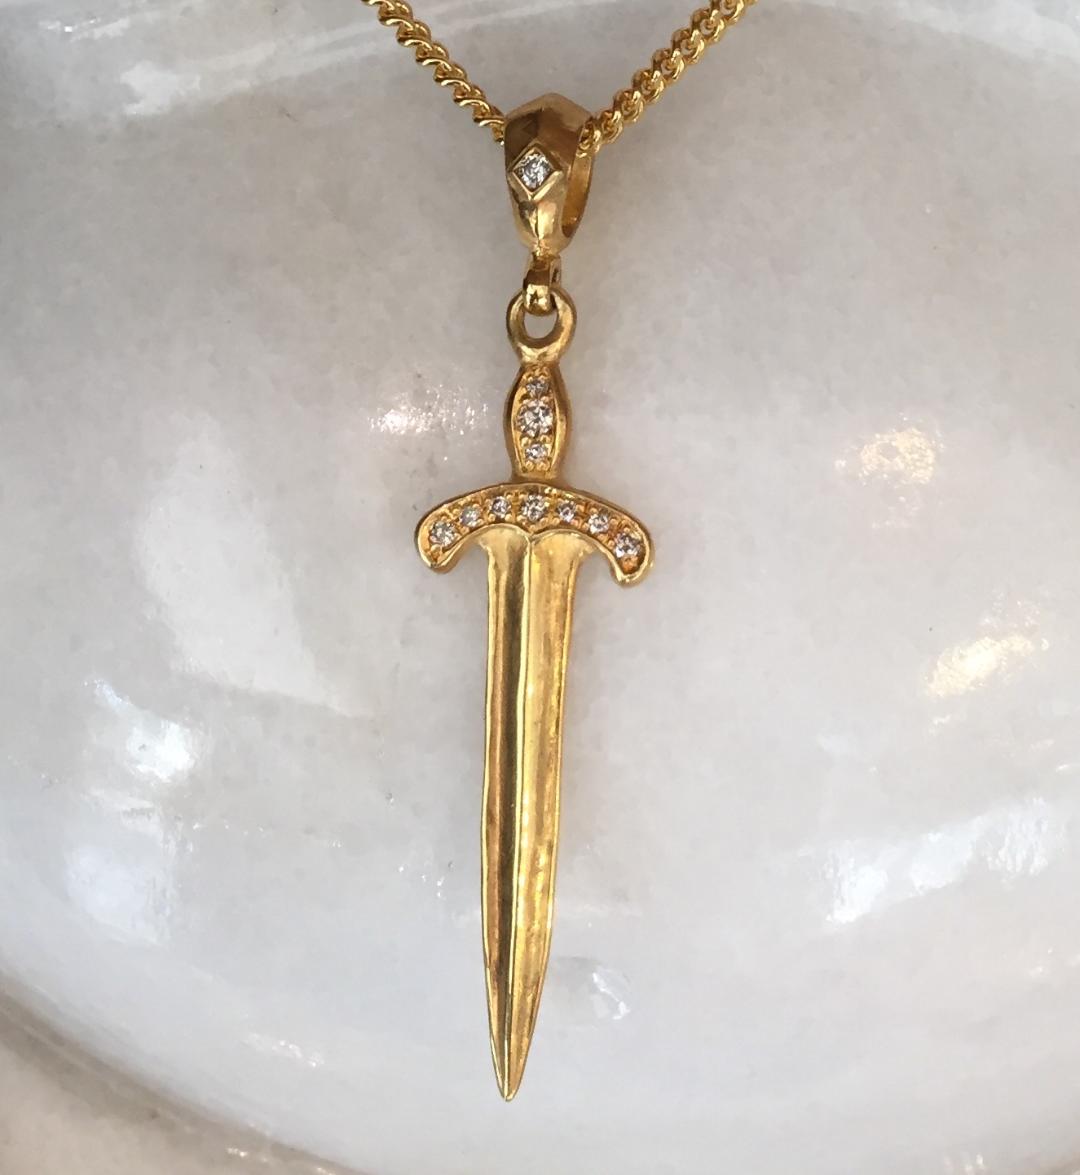 Necklace - Golden Knight's Sword With Diamonds by Roman Paul